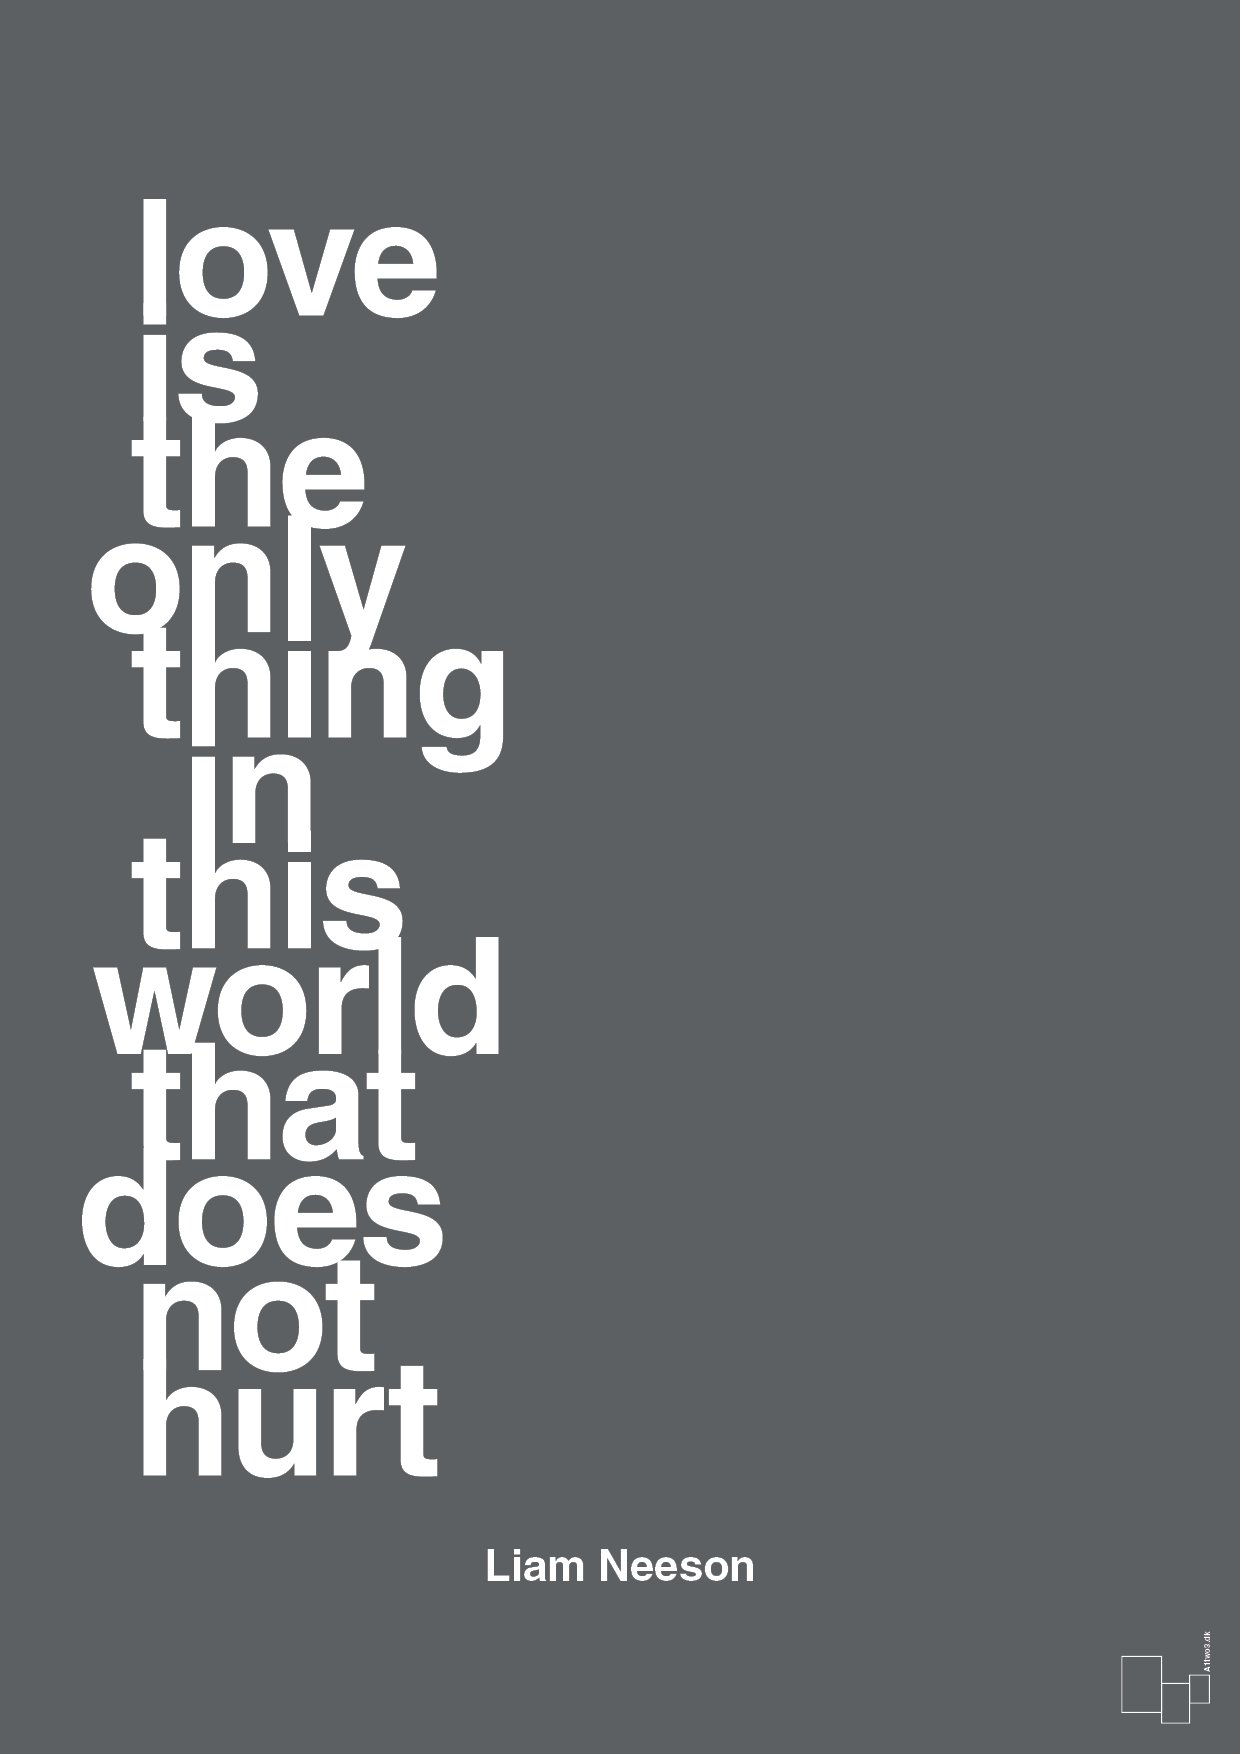 love is the only thing in this world that does not hurt - Plakat med Citater i Graphic Charcoal